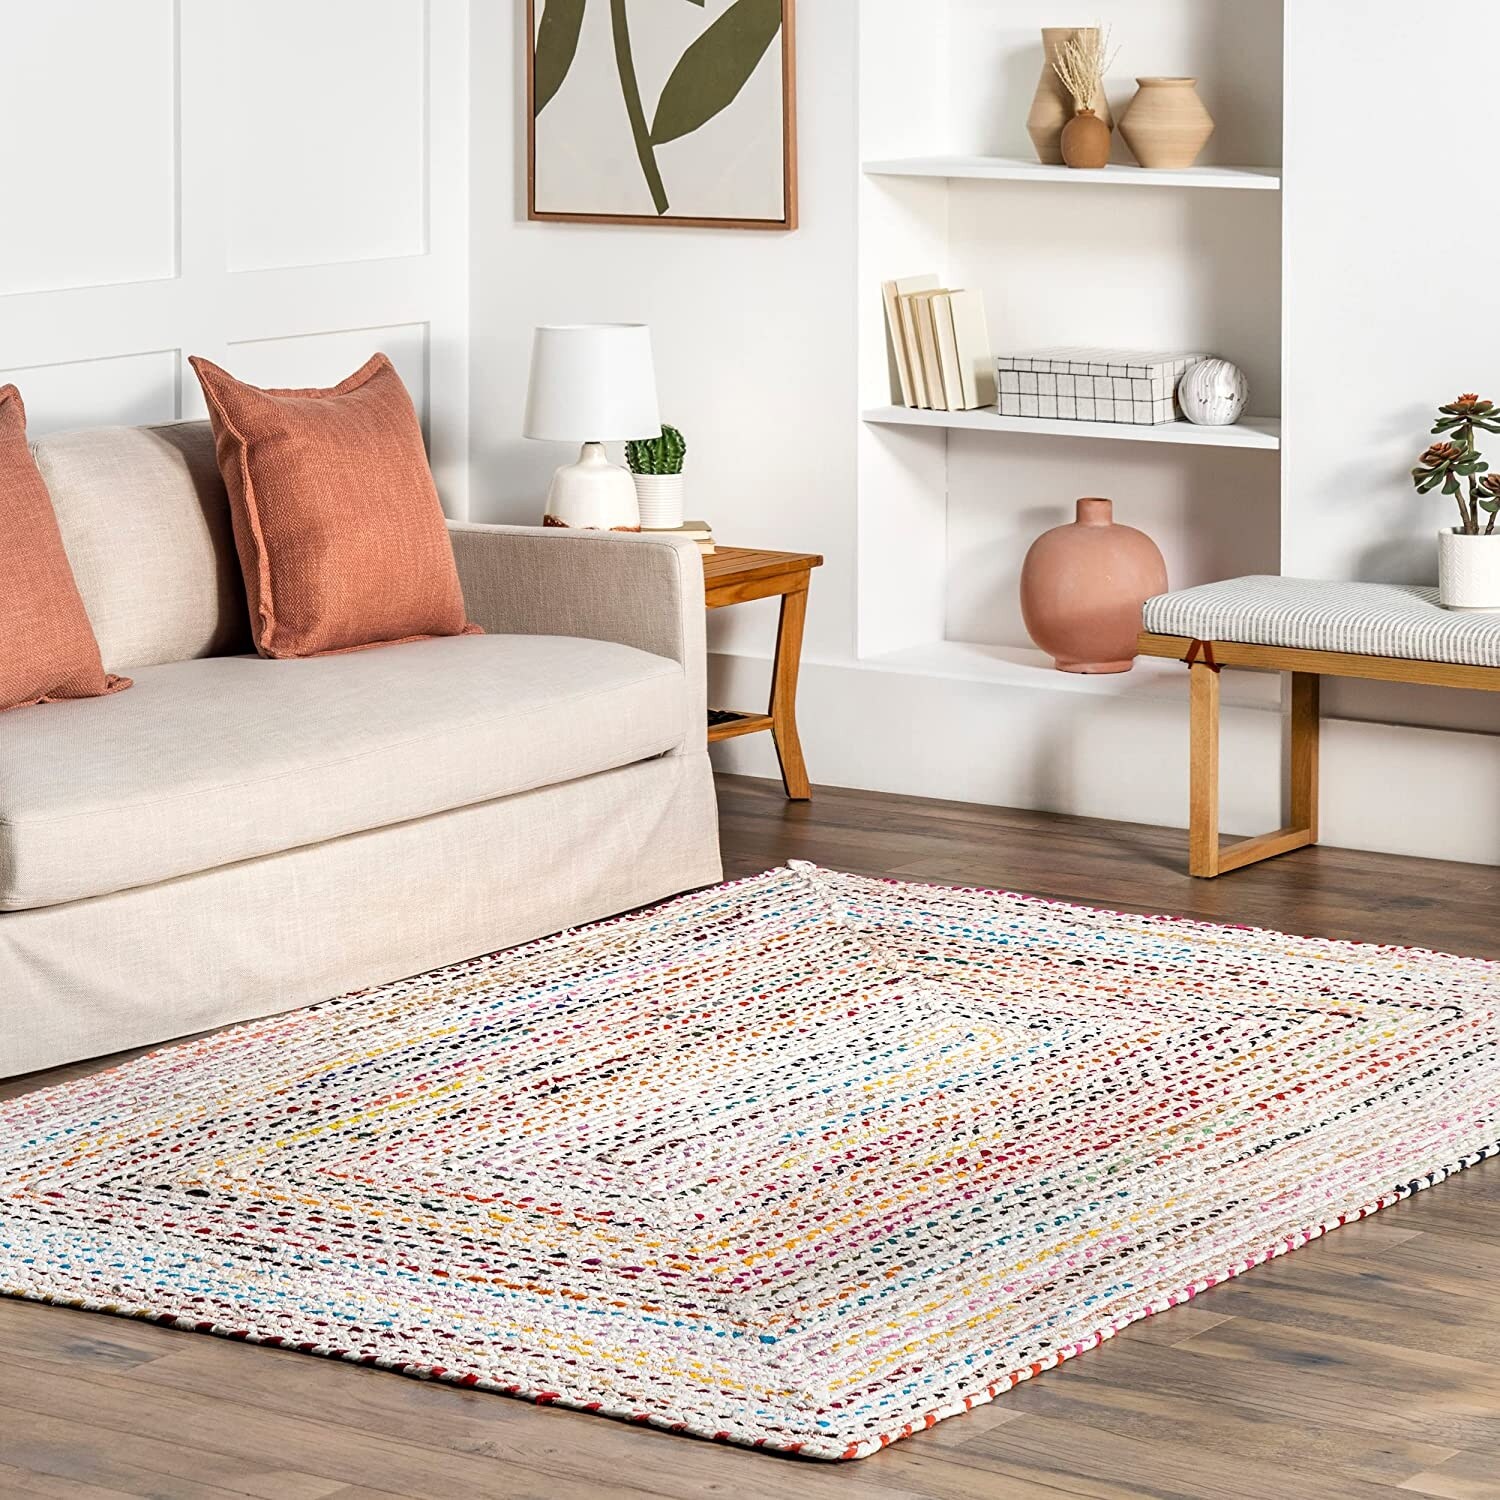 Handmade Braided Cotton Jute Multi-Color Country Area Rugs